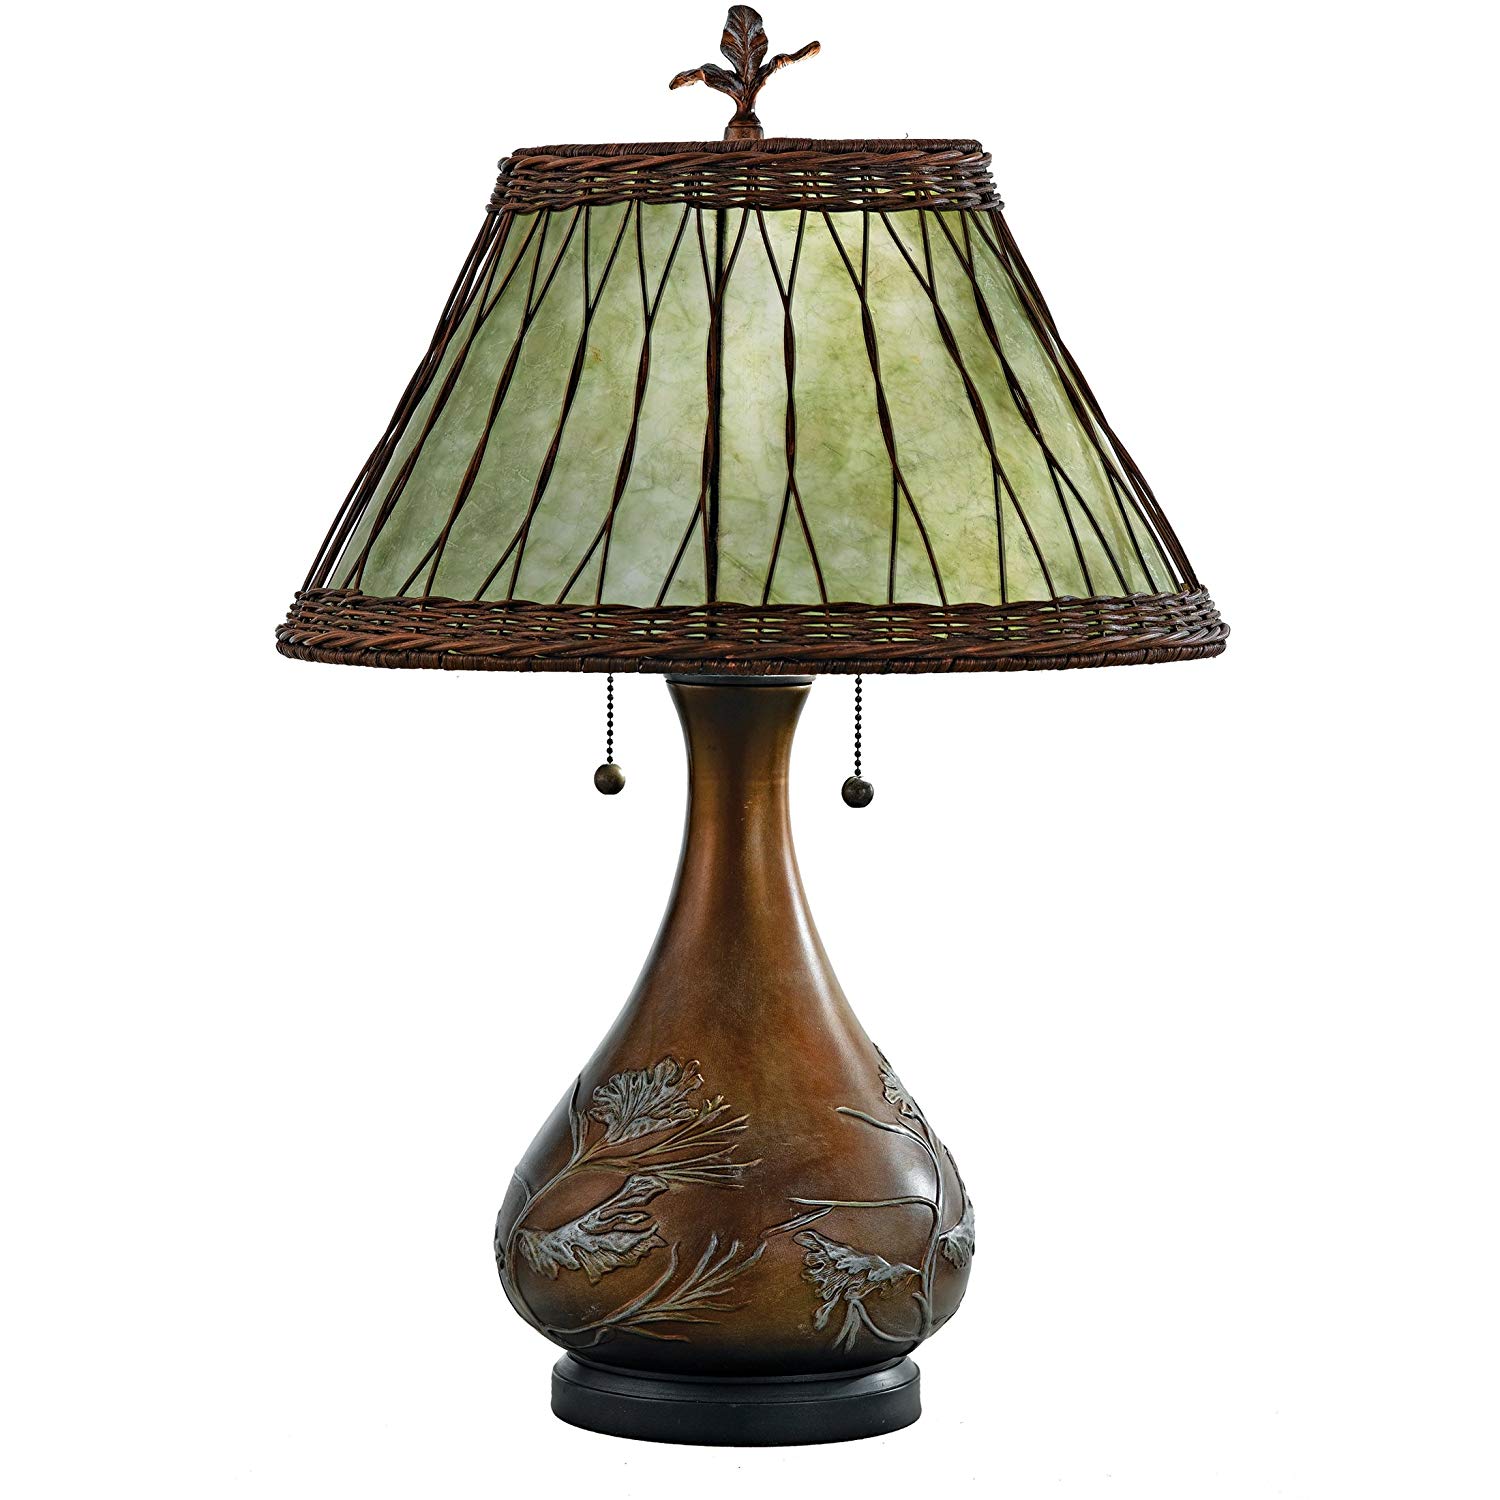 quoizel two light table lamptable lamp mica oriental accent lamps soft shade small green wood and steel side nautical theme bathroom chairs white mats pottery barn metal